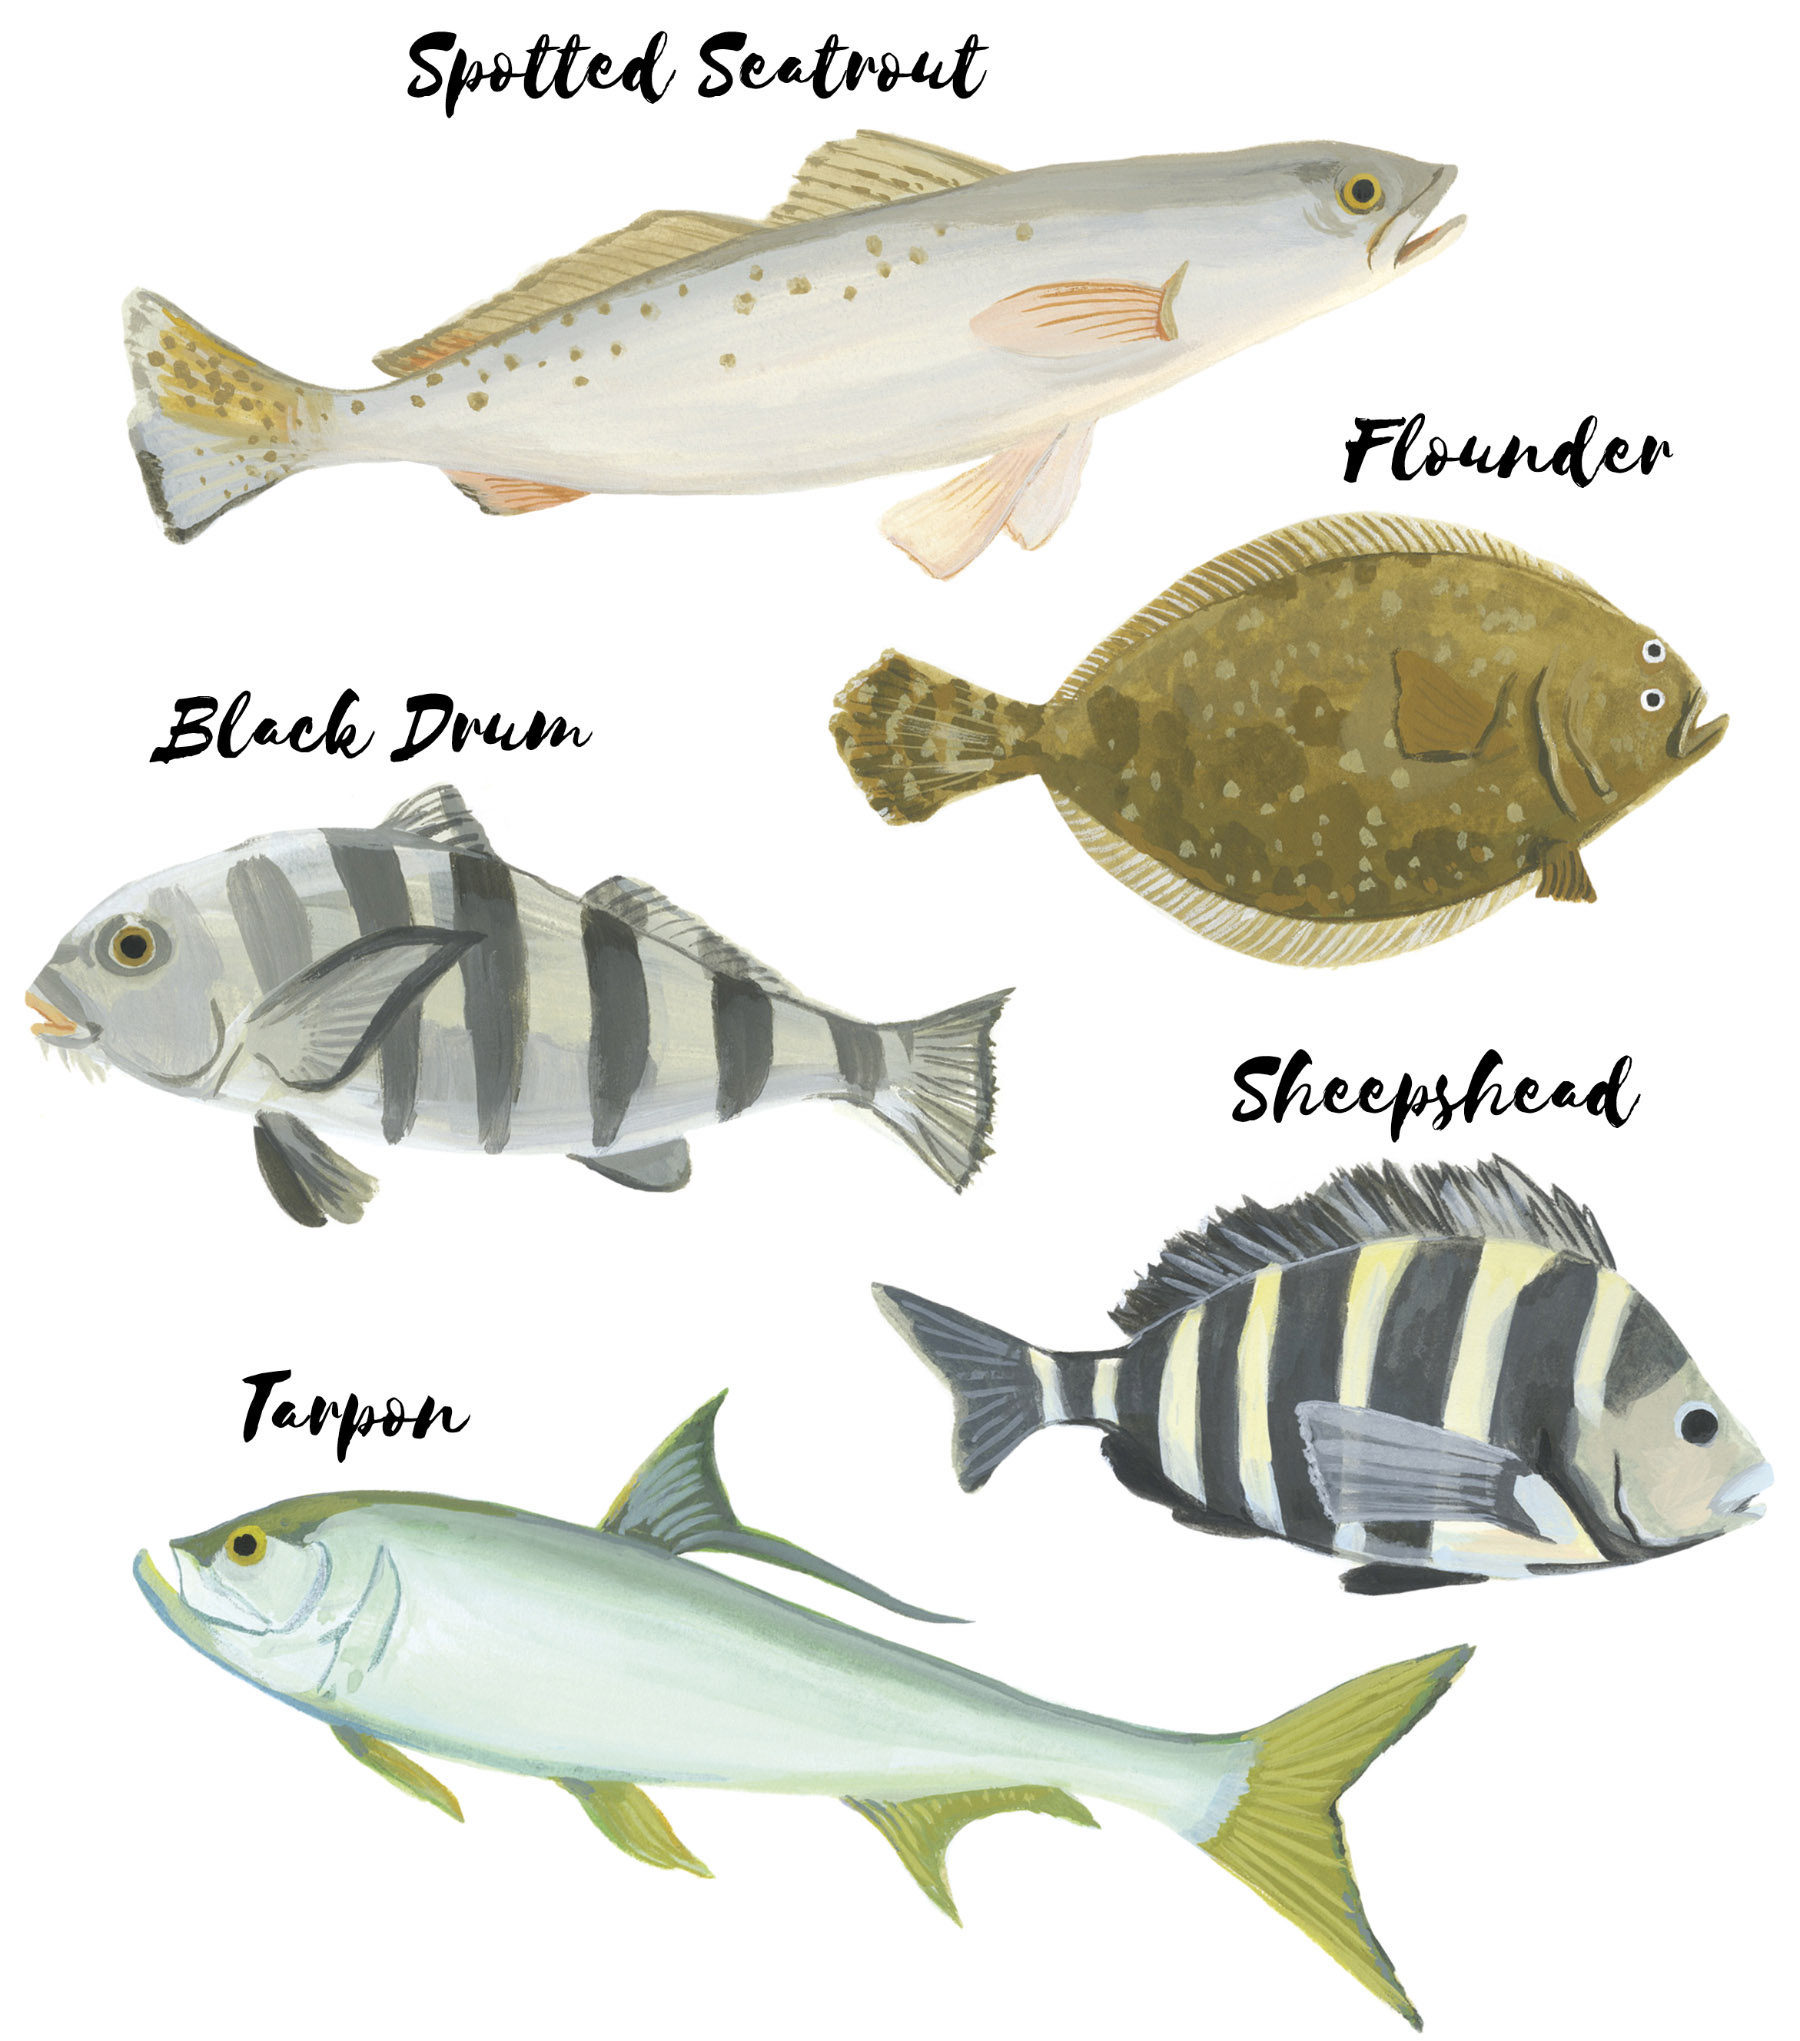 An illustration of various fish -- spotted seatrout, flounder, black drum, sheepshead and tarpon